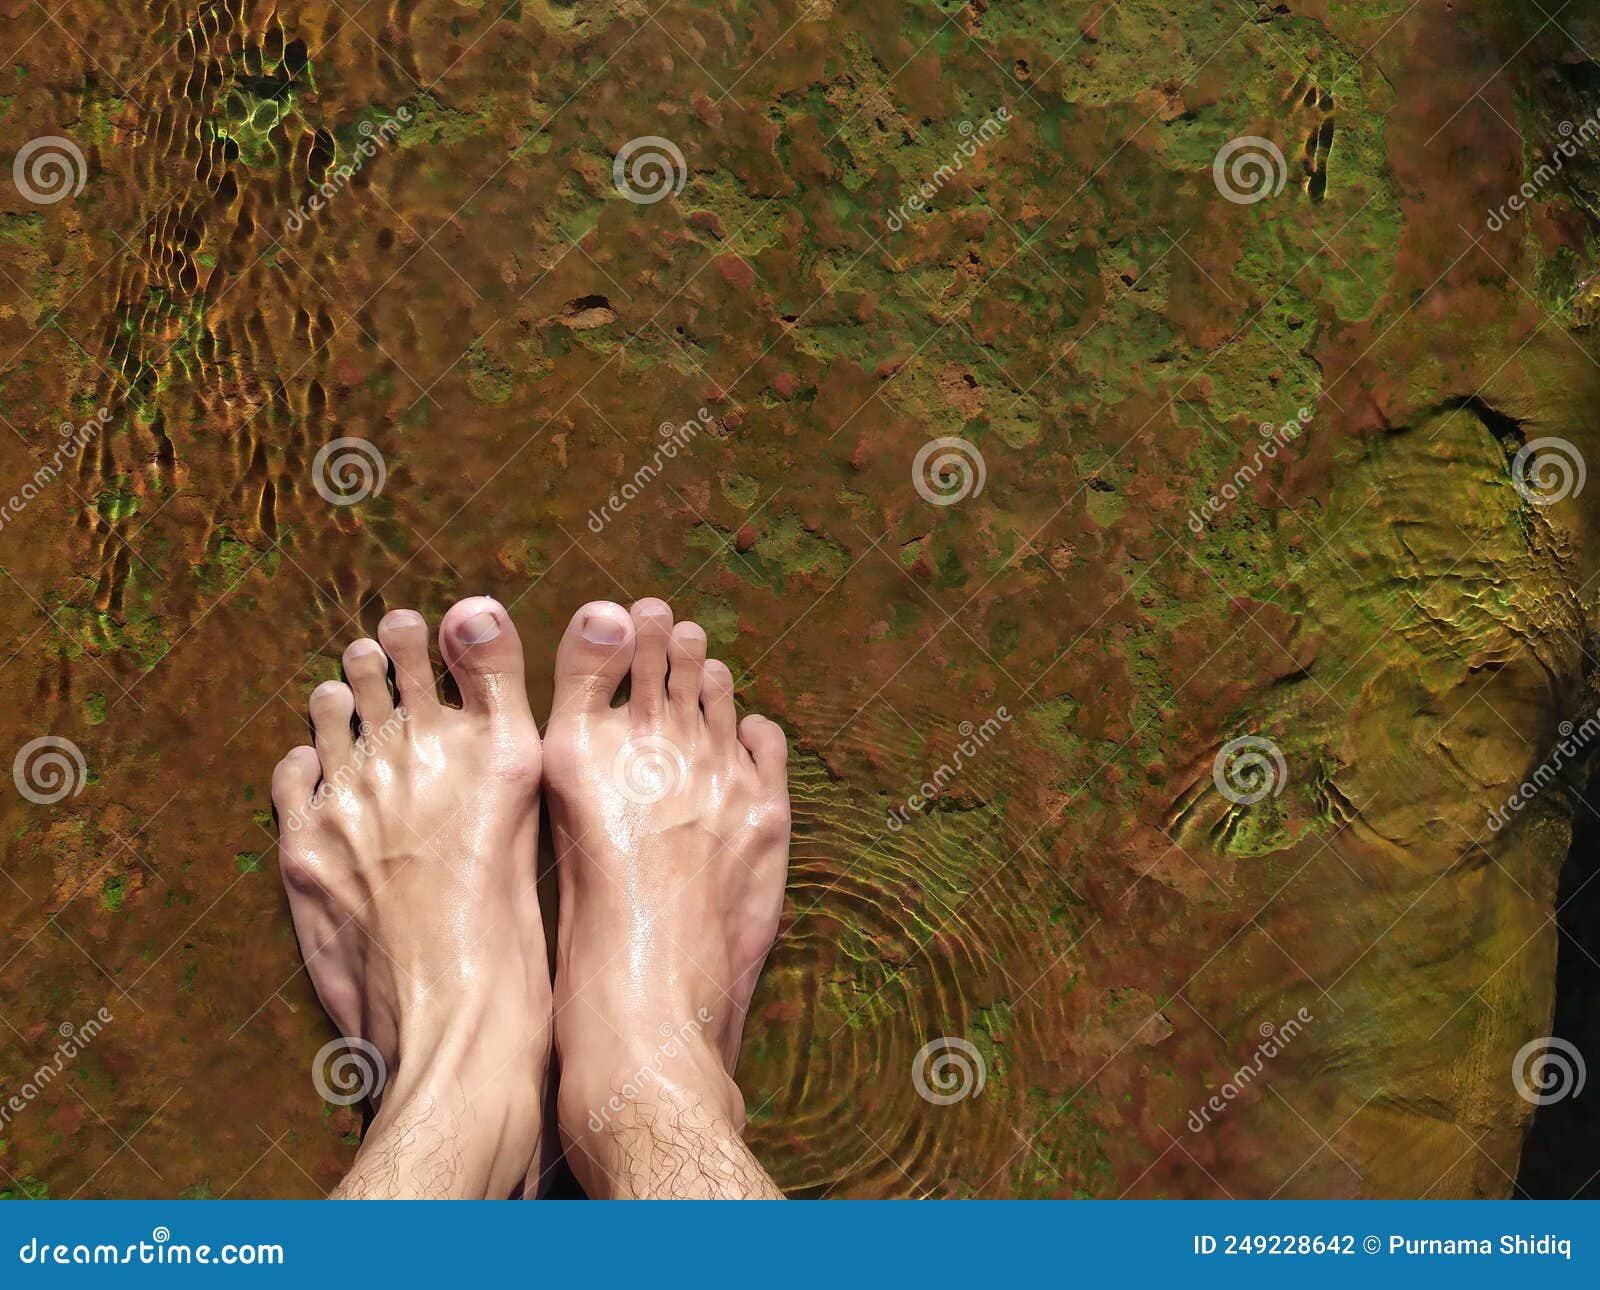 The Feet of a Man Standing on a Rock Running Hot Water. Stock Photo ...